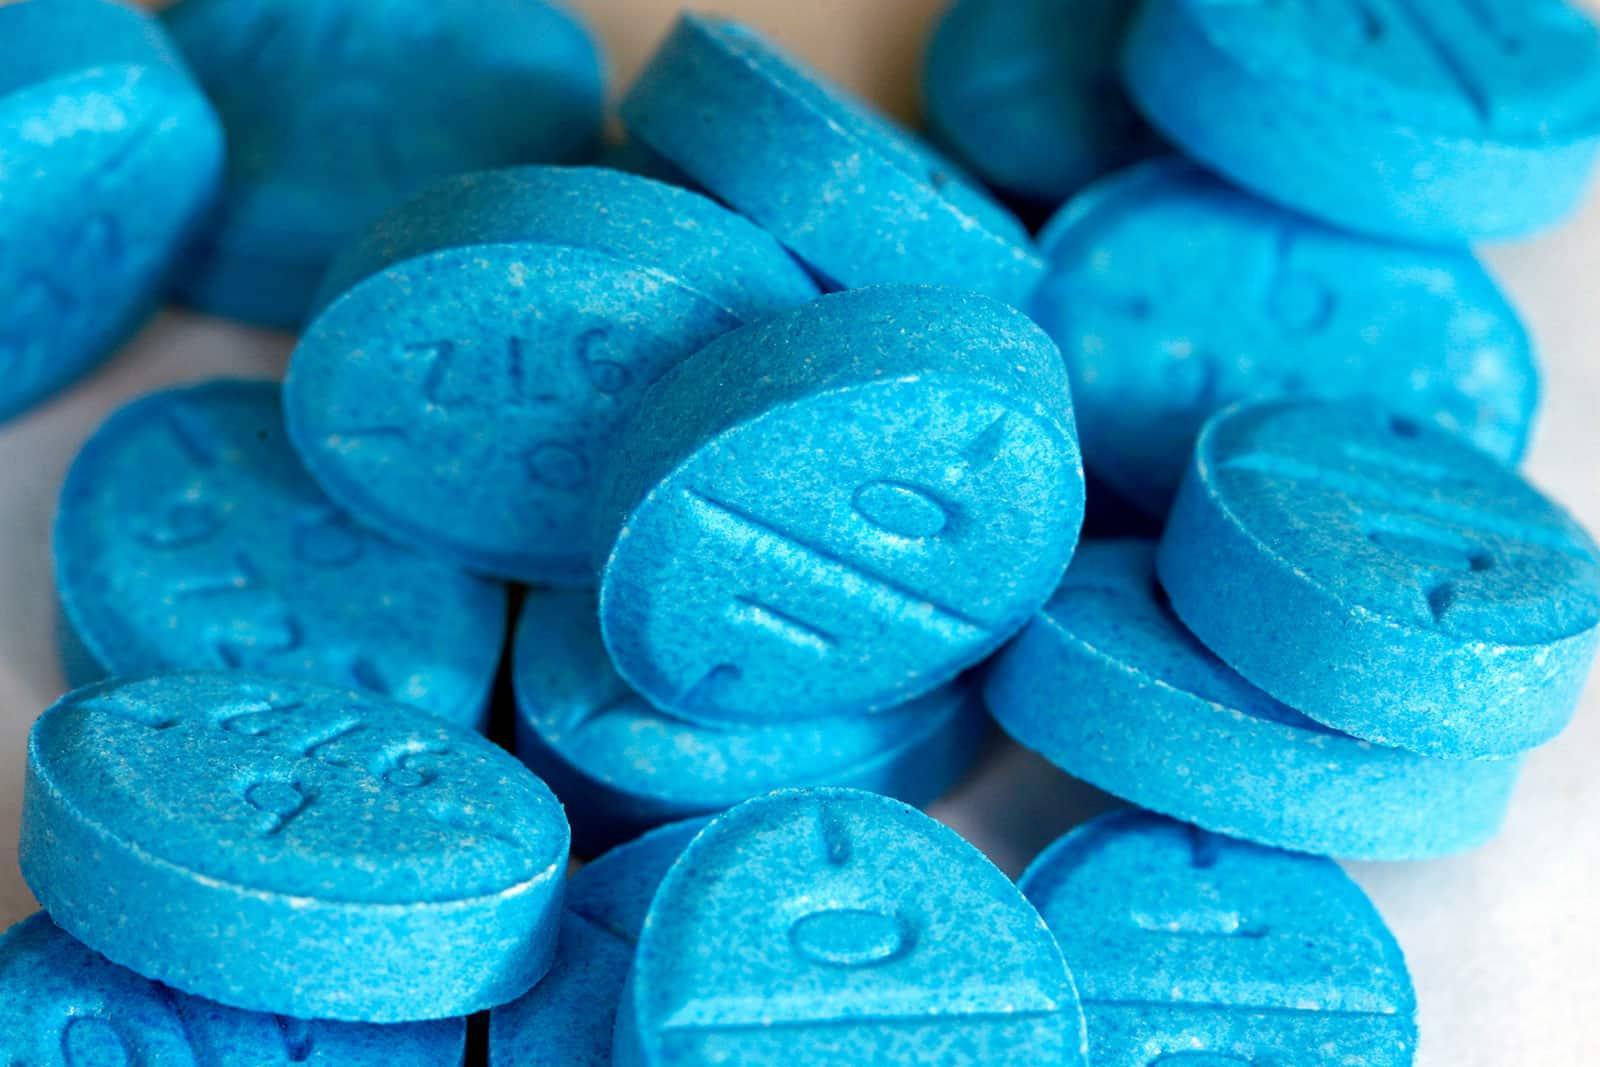 A pile of blue pills with the imprint A4.